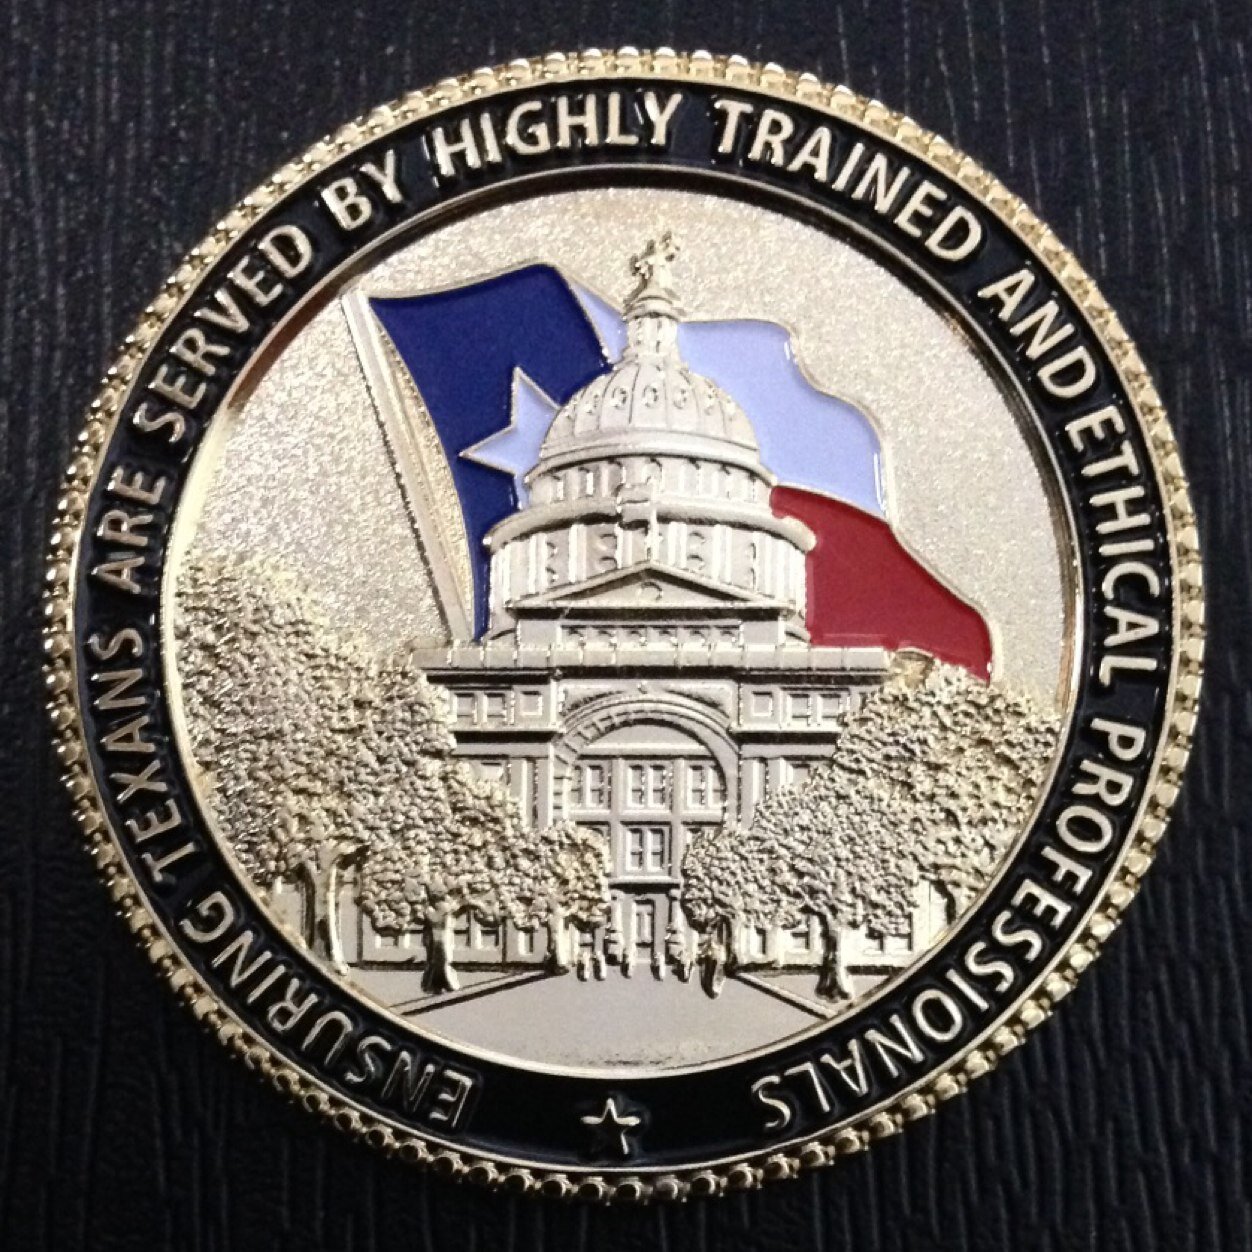 Official account for the Texas Commission on Law Enforcement.